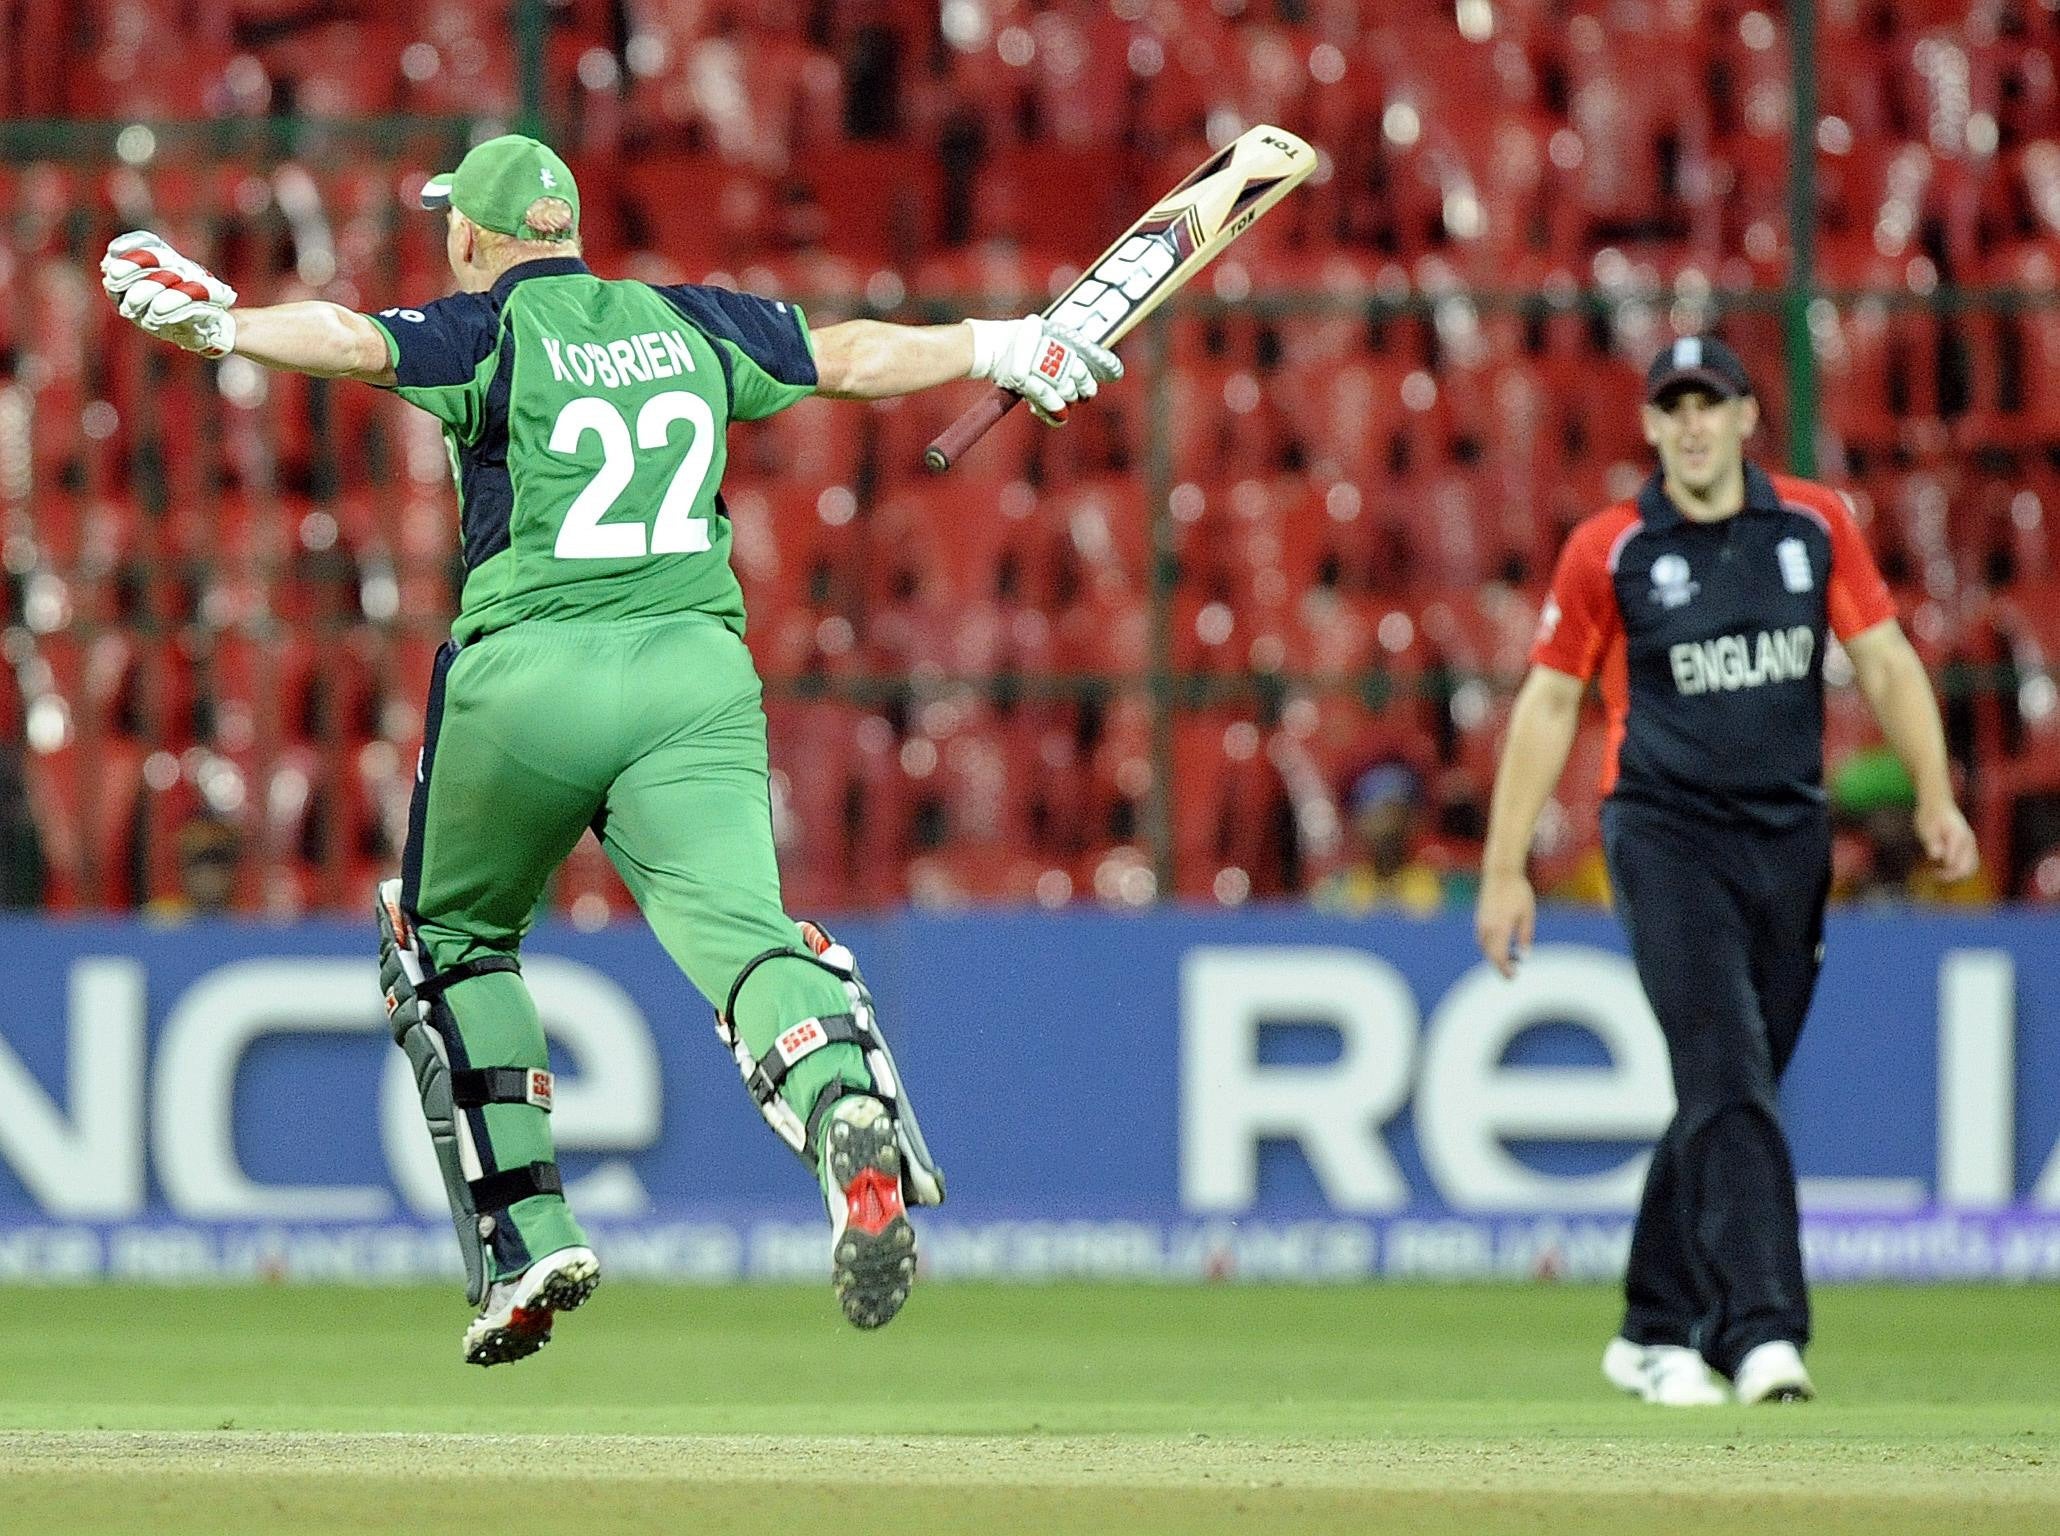 Kevin O’Brien celebrates scoring his World Cup century against England